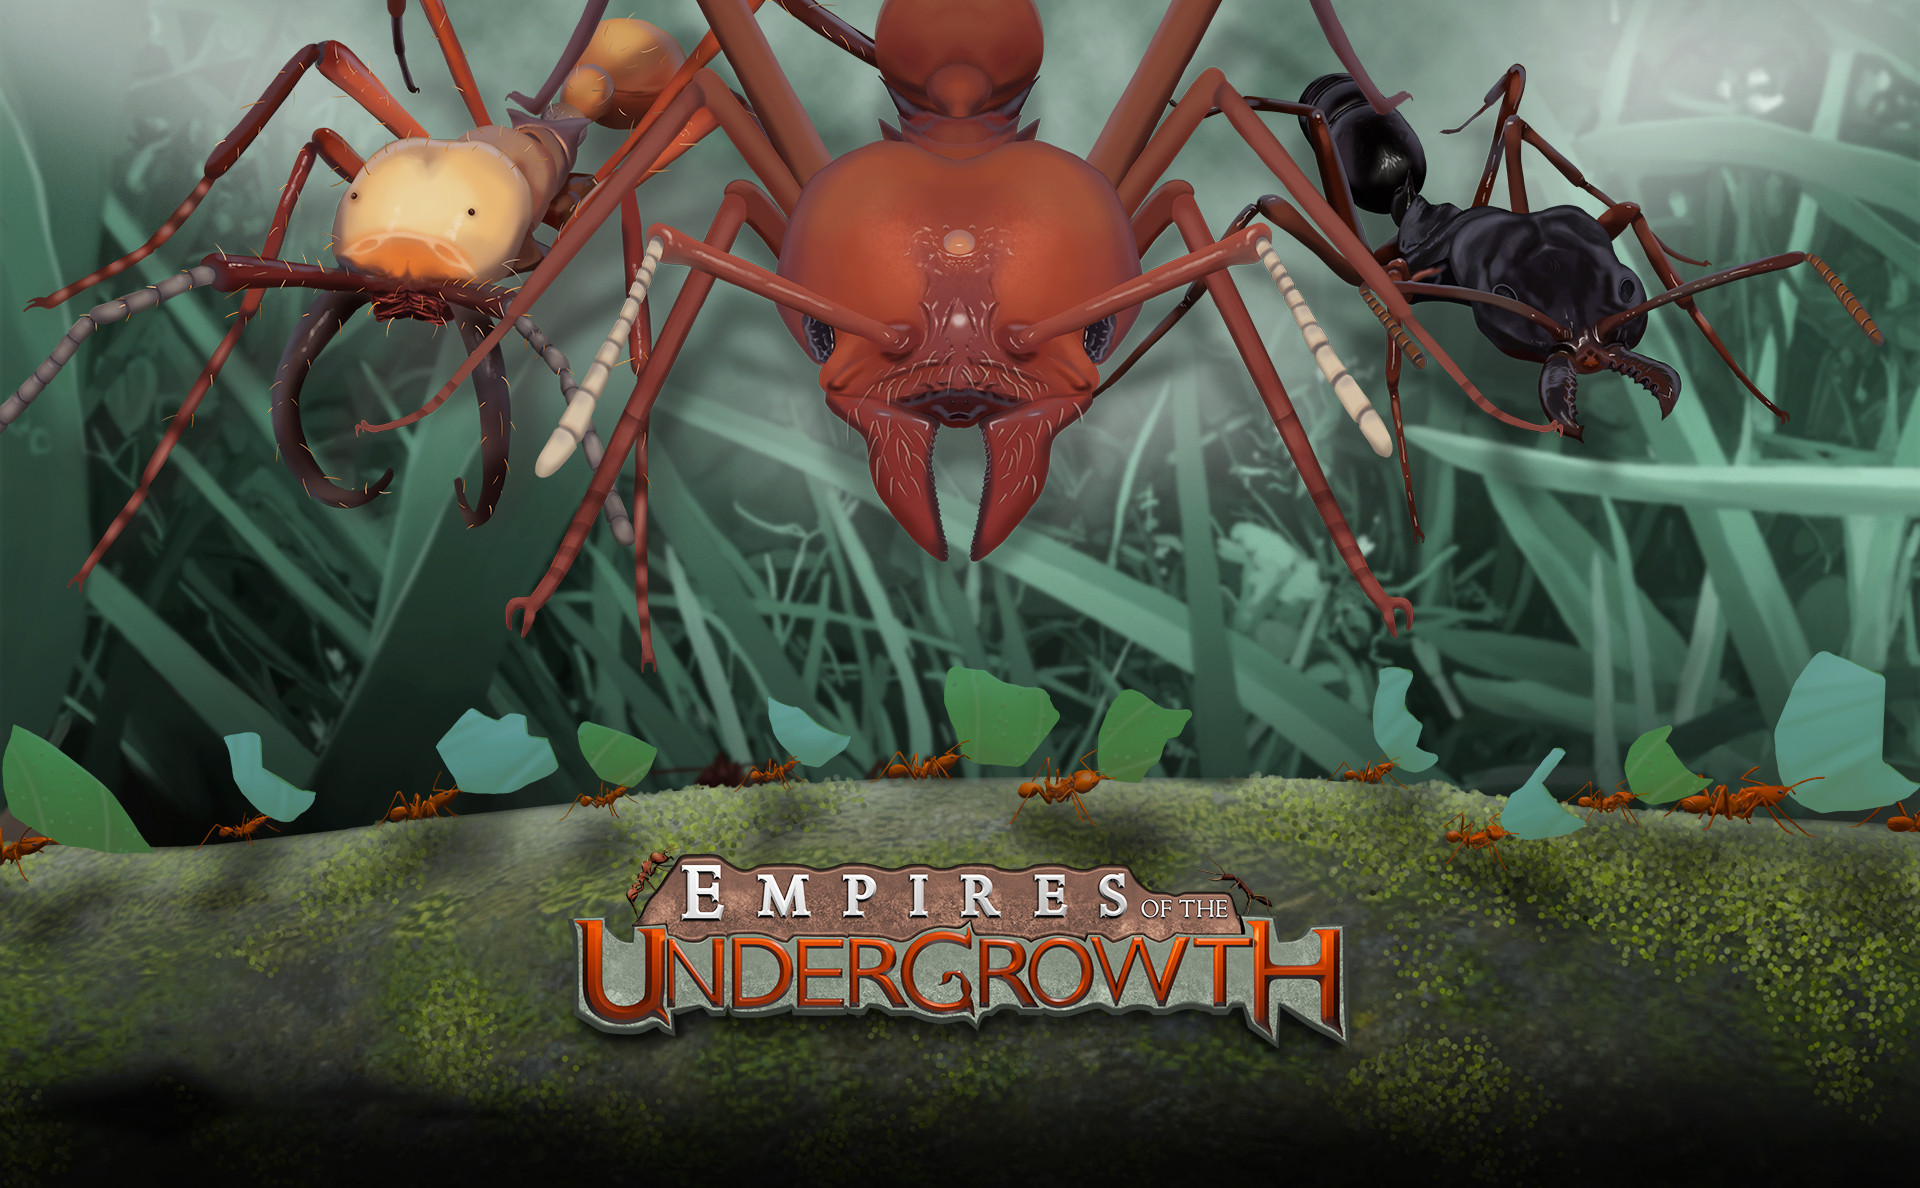 beat 3.1 empire of the undergrowth